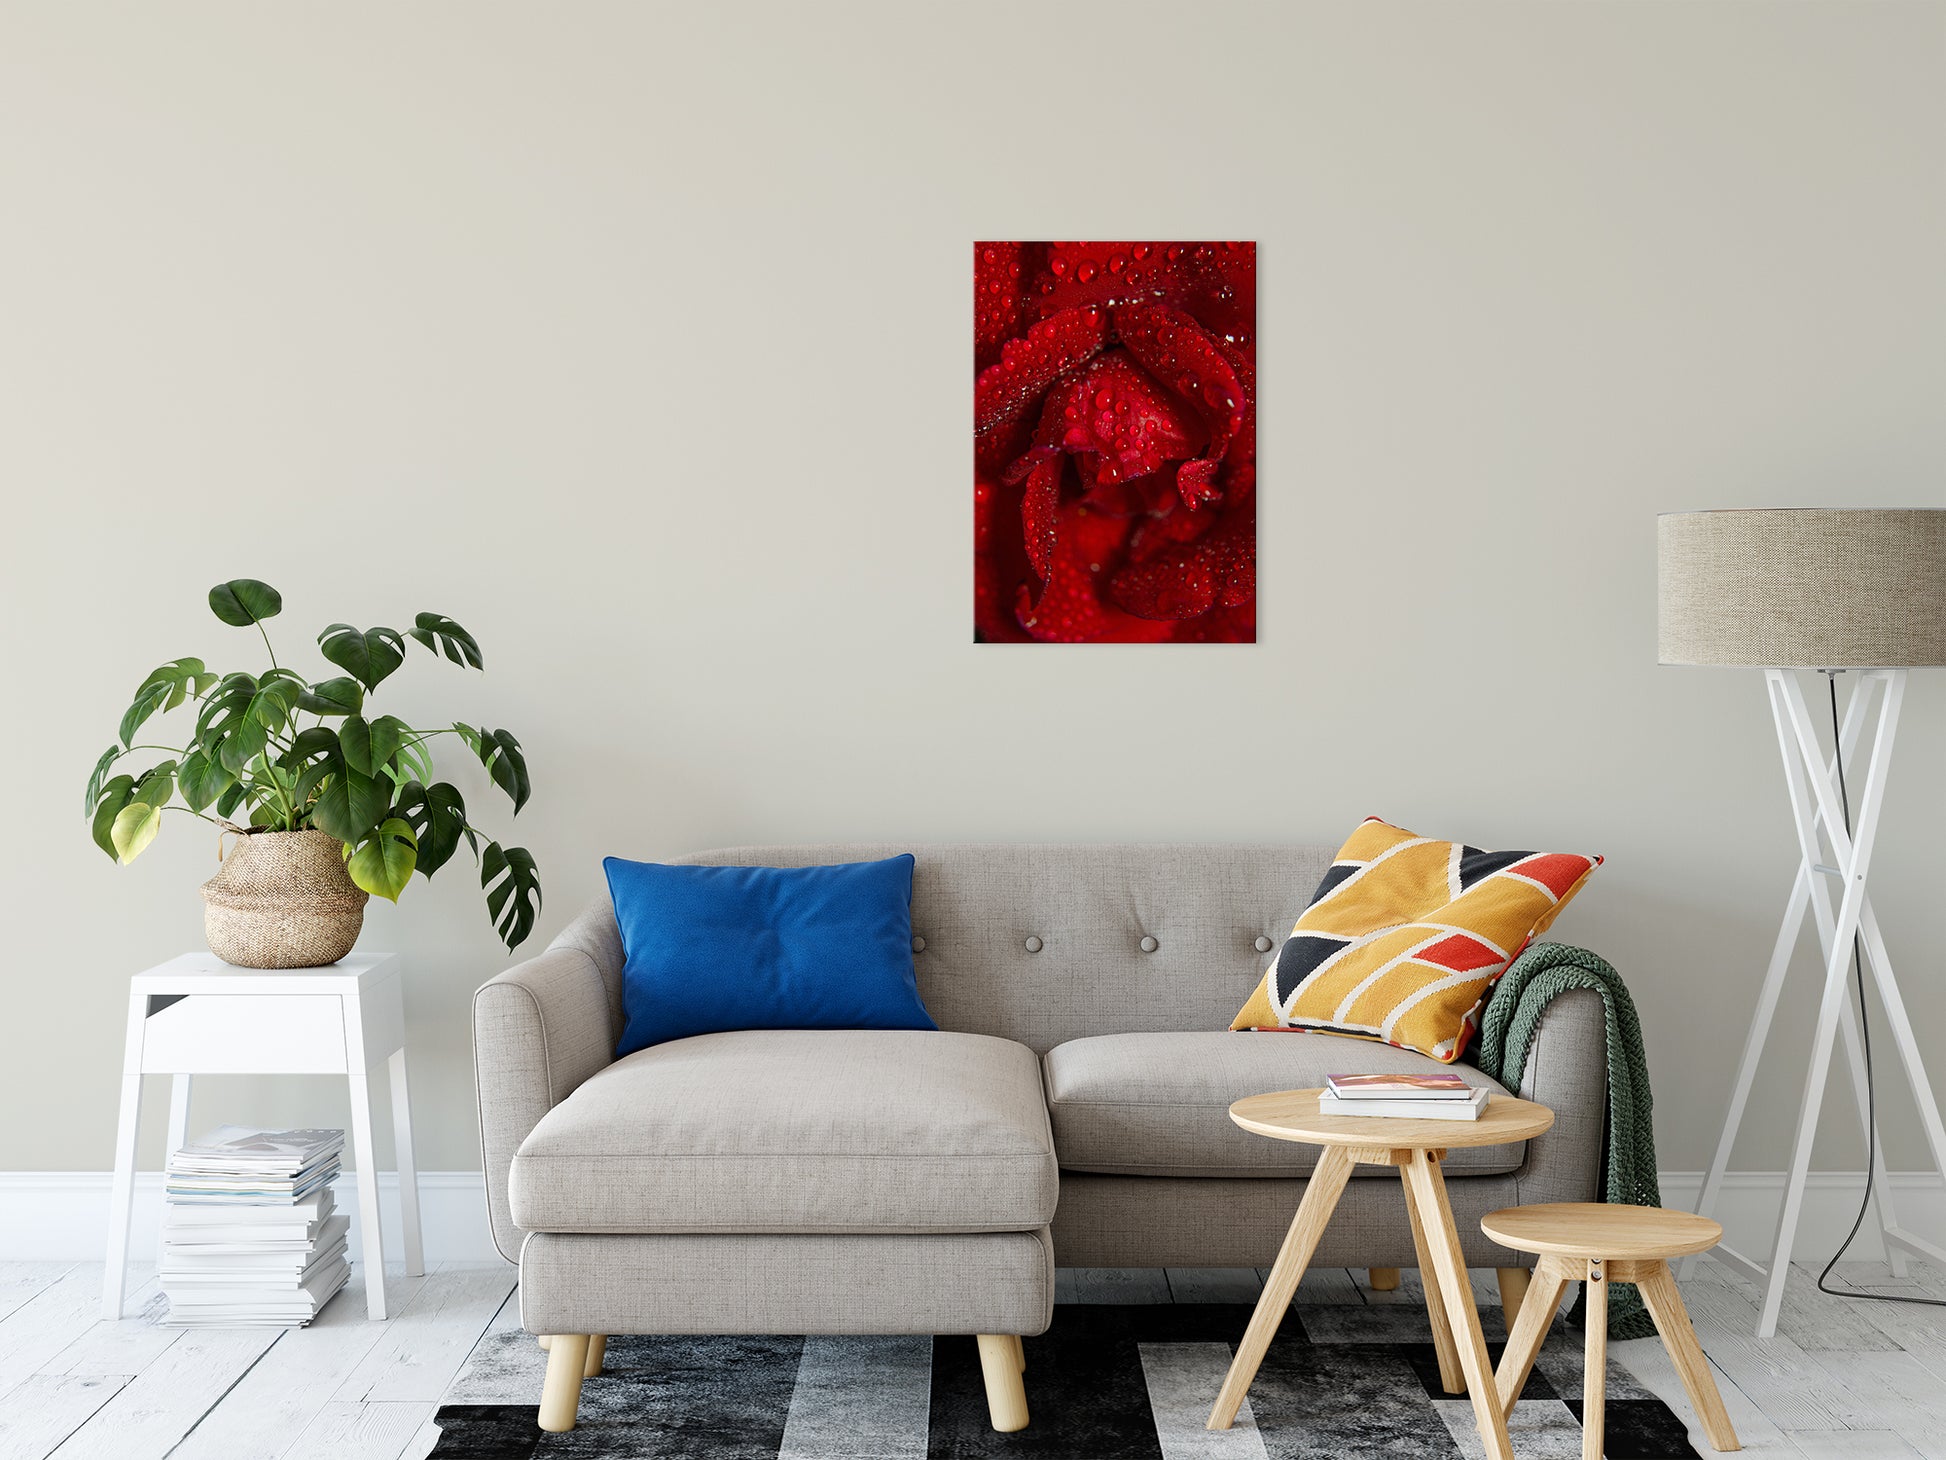 Royal Red Rose Nature / Floral Photo Fine Art Canvas Wall Art Prints 20" x 30" - PIPAFINEART